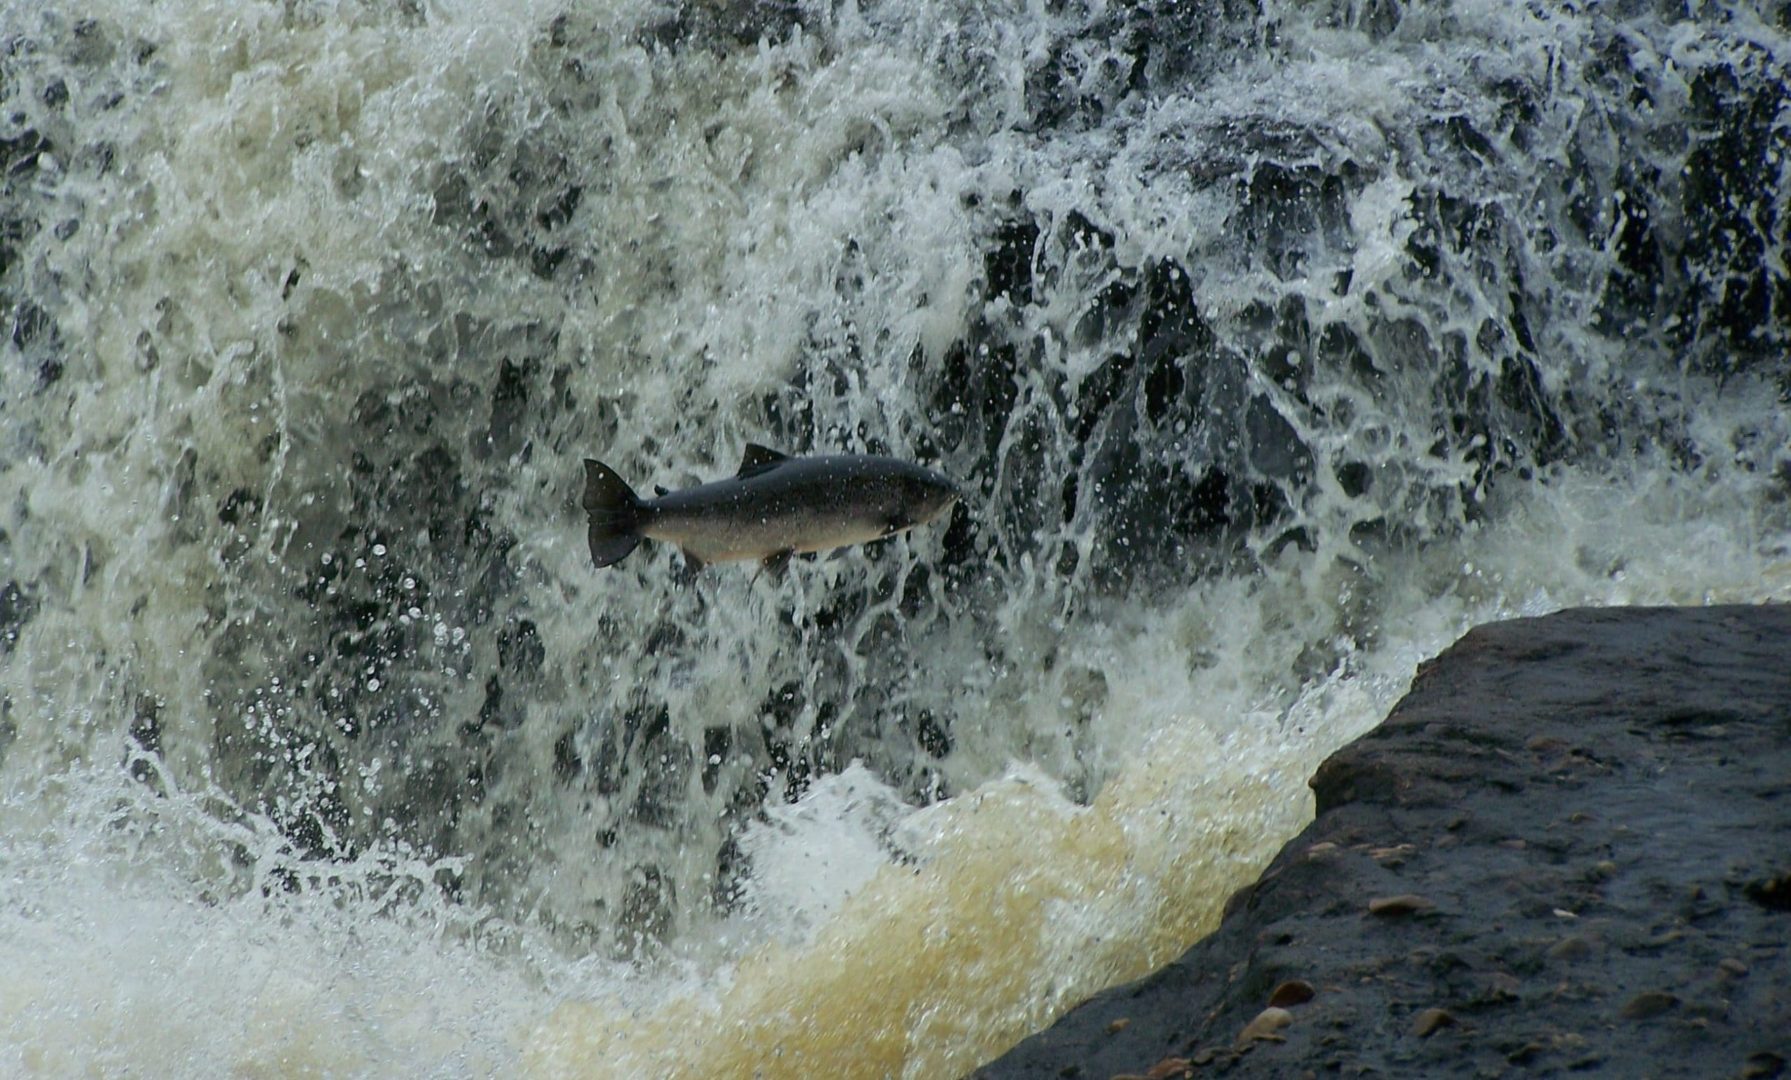 A salmon jumps over a water fall.